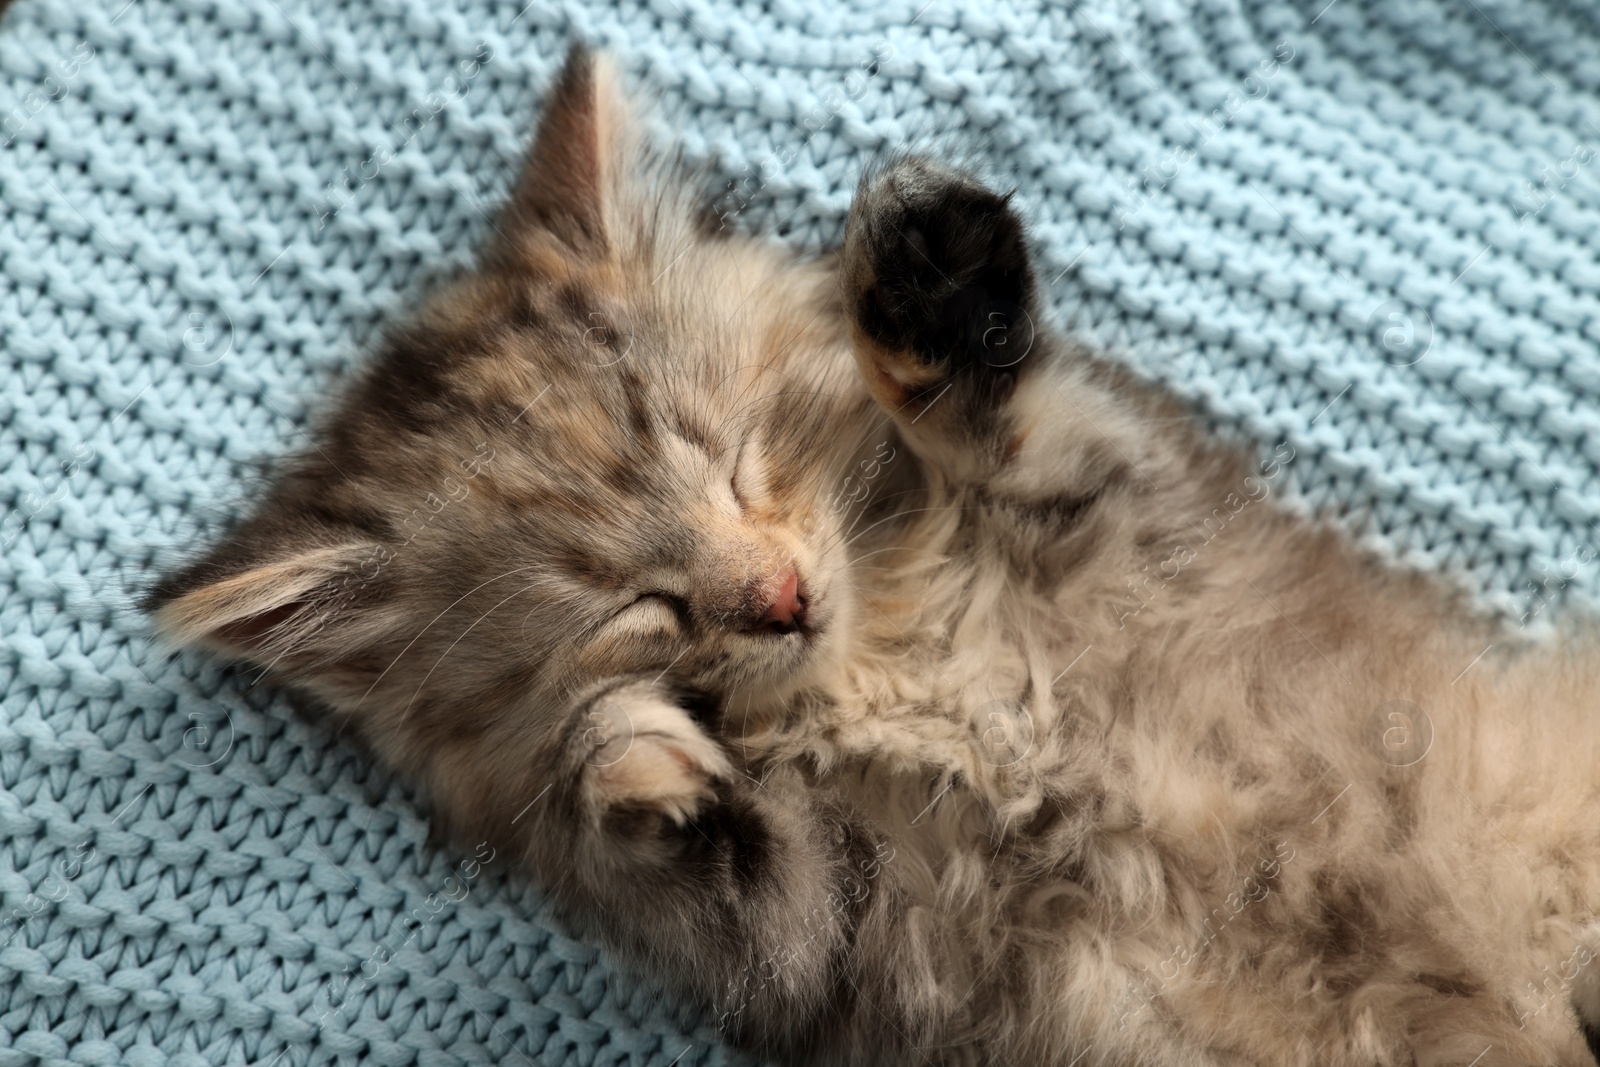 Photo of Cute kitten sleeping on light blue knitted blanket, top view